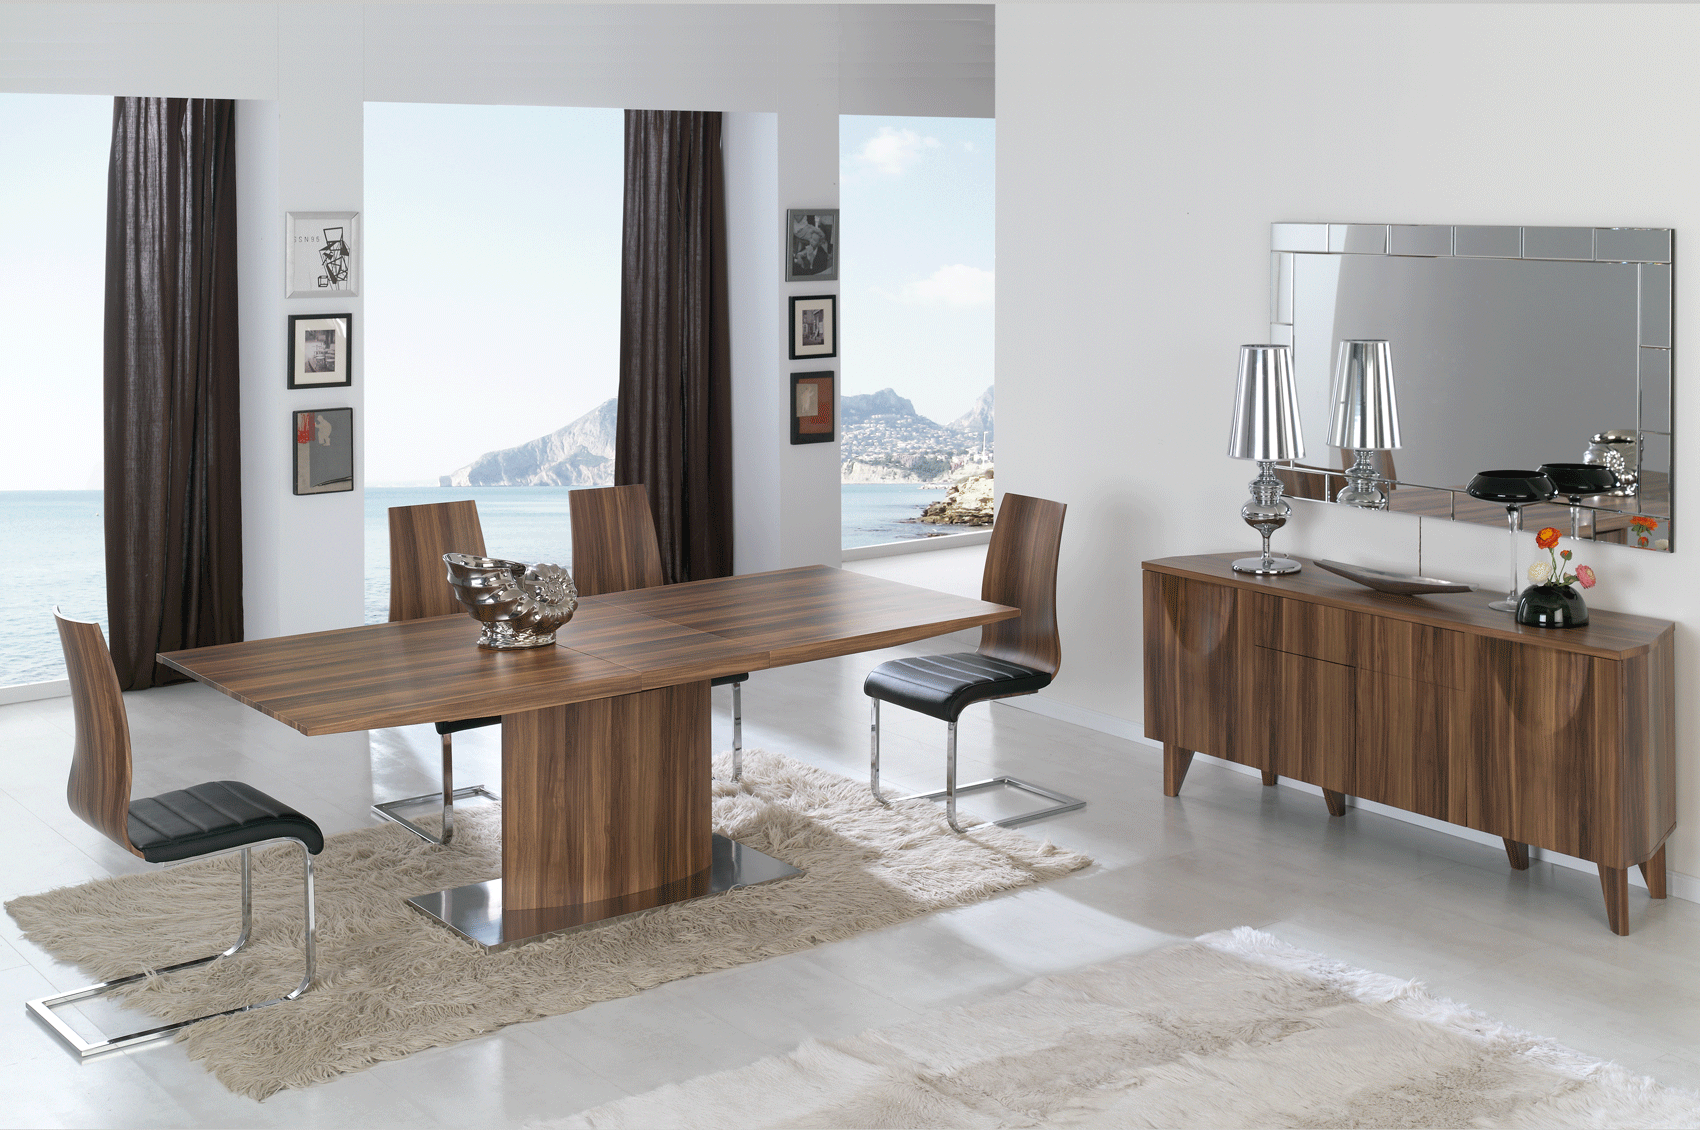 Wallunits Hallway Console tables and Mirrors DT-02, CH-1004